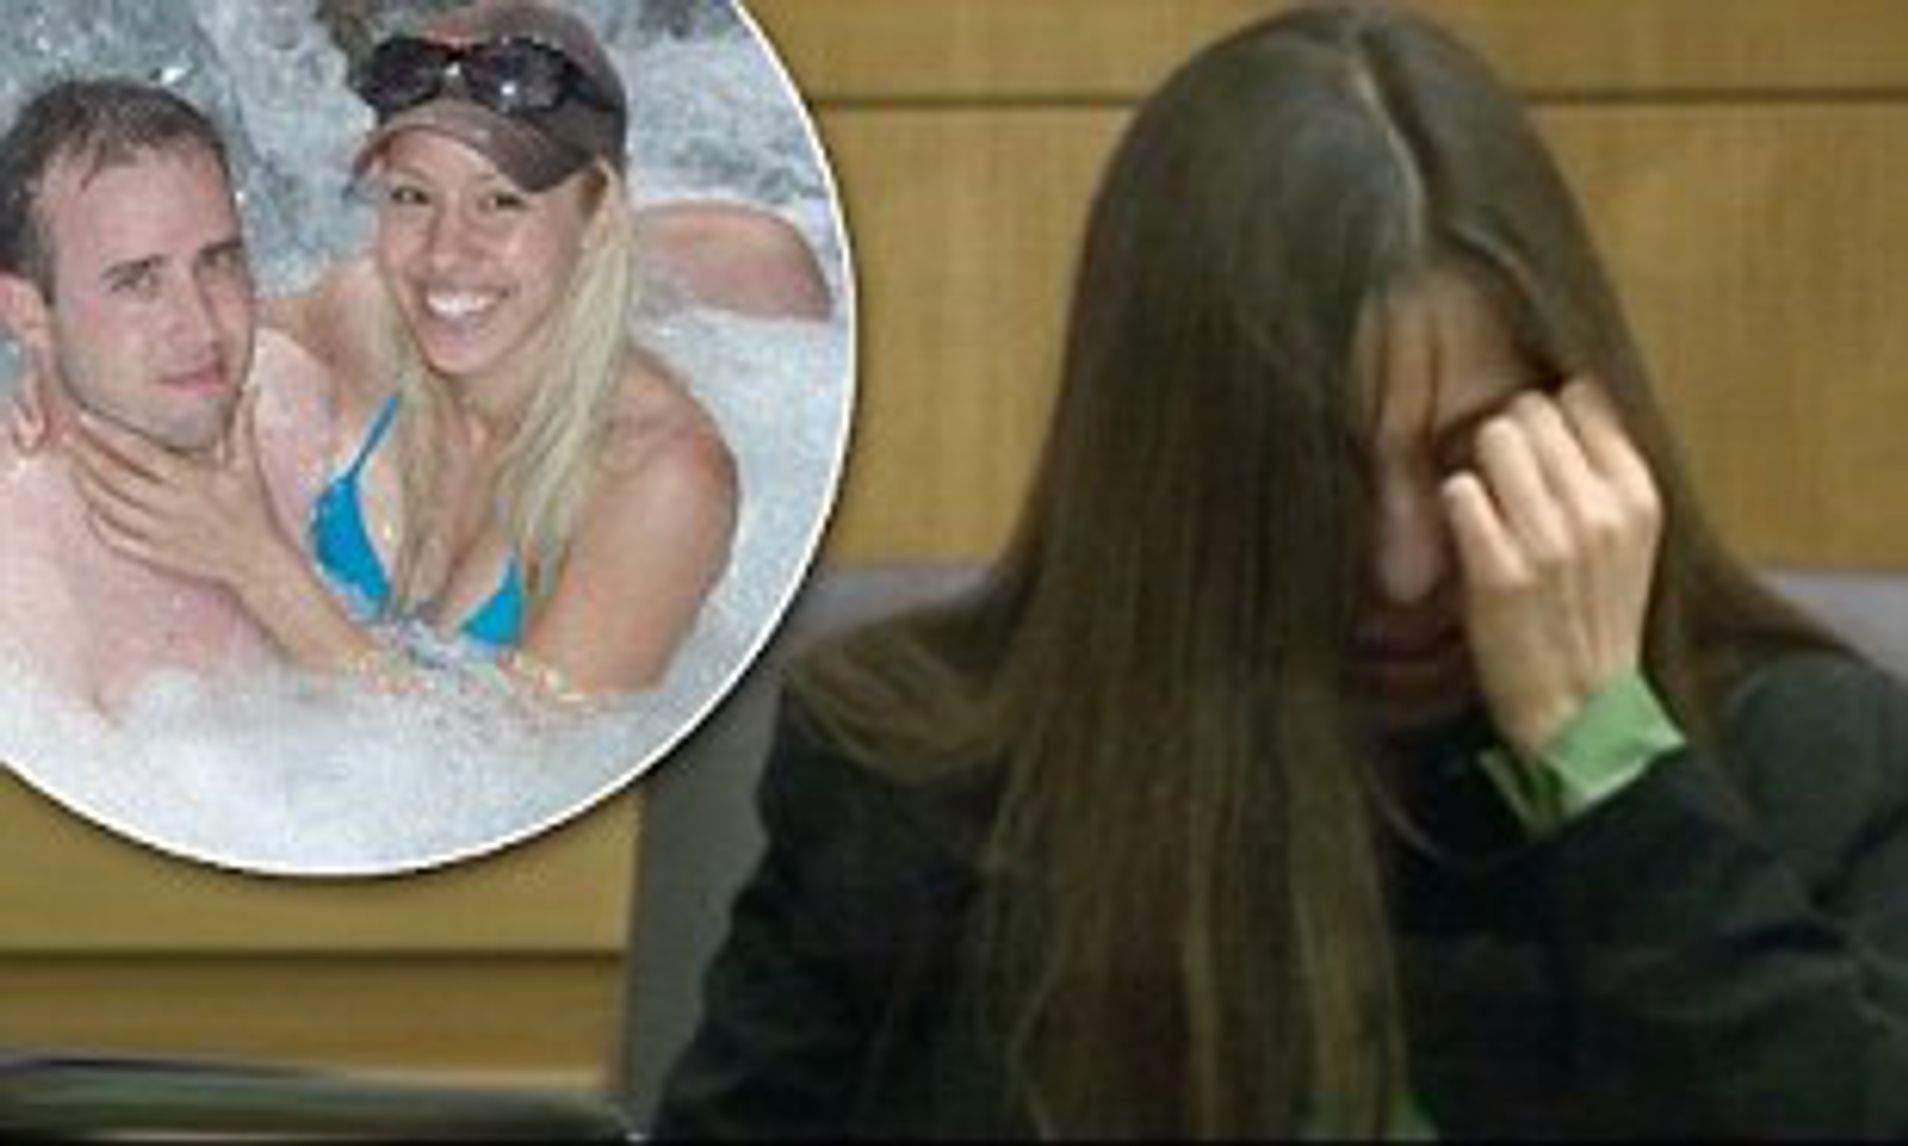 andrew porterfield recommends jodi arias sex pictures pic